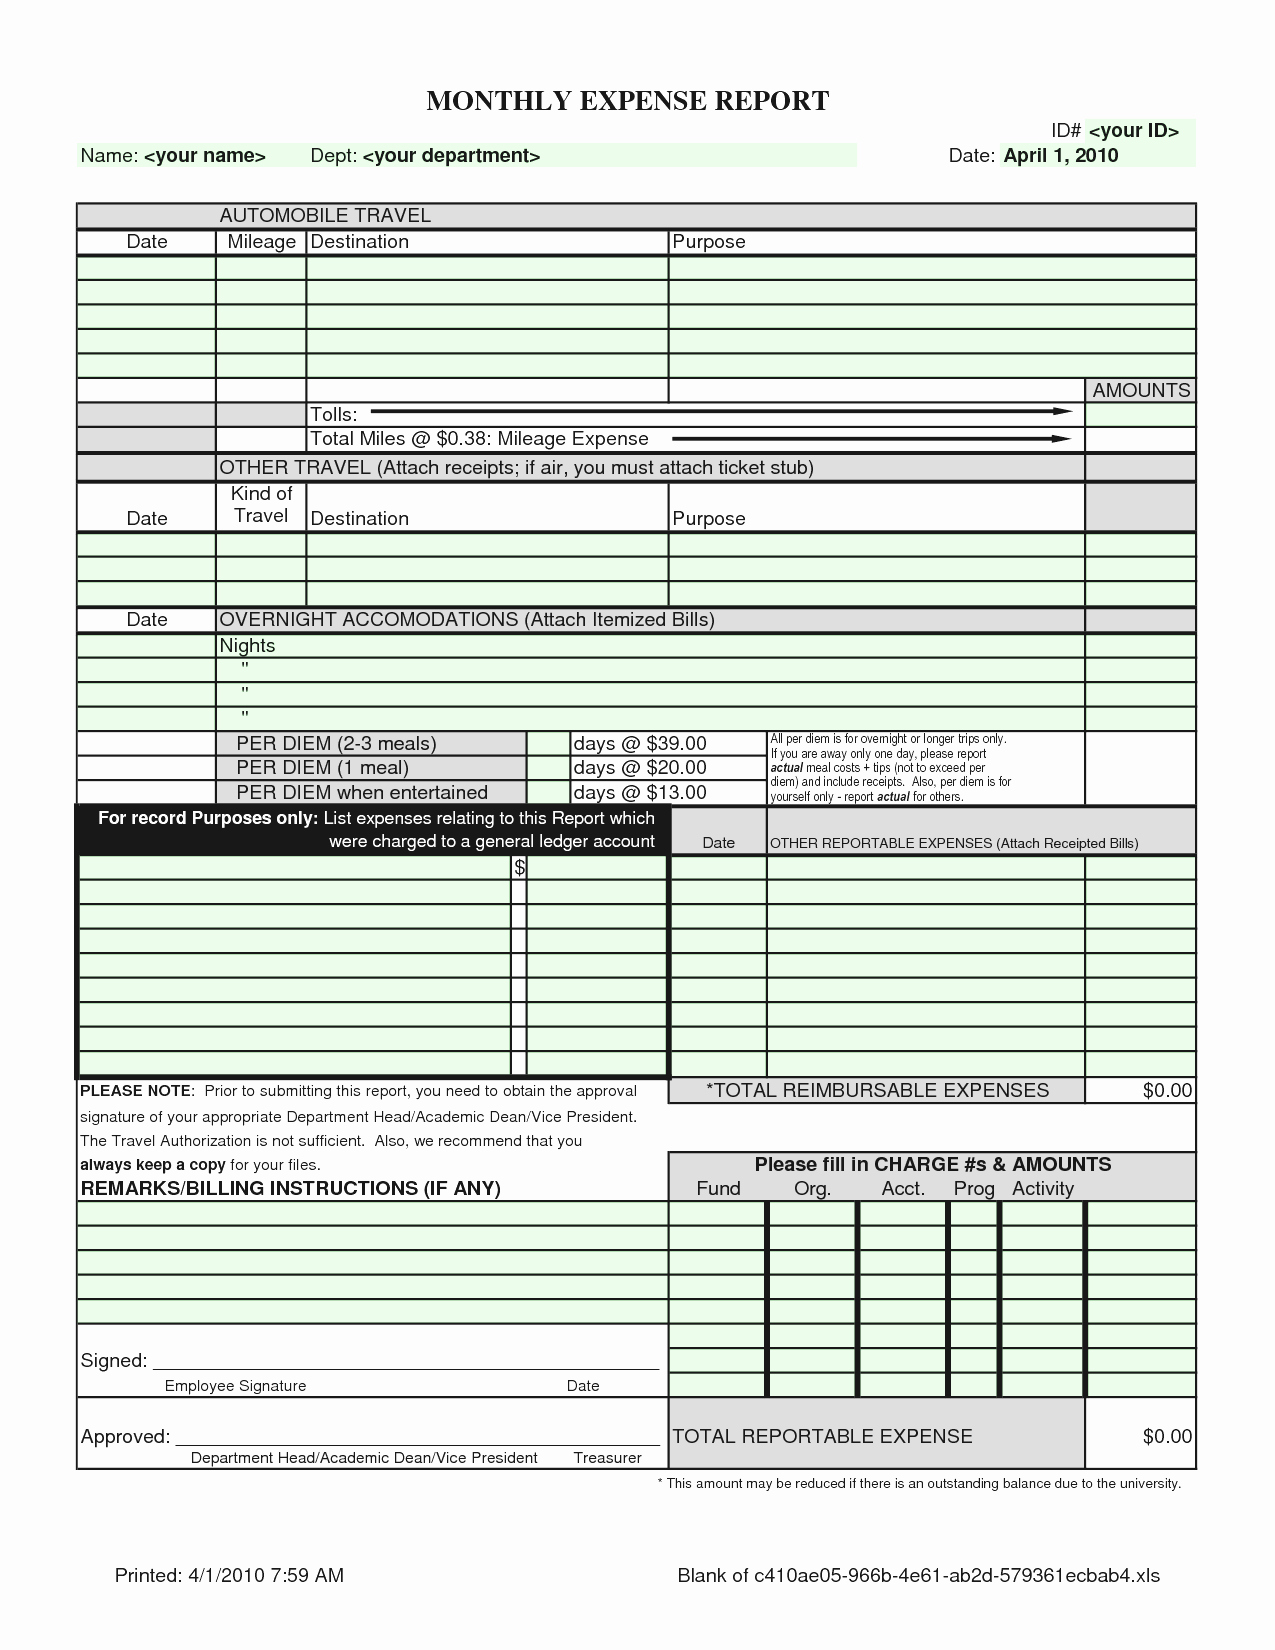 Monthly Expense Report Template Beautiful Blank Expense Report Mughals